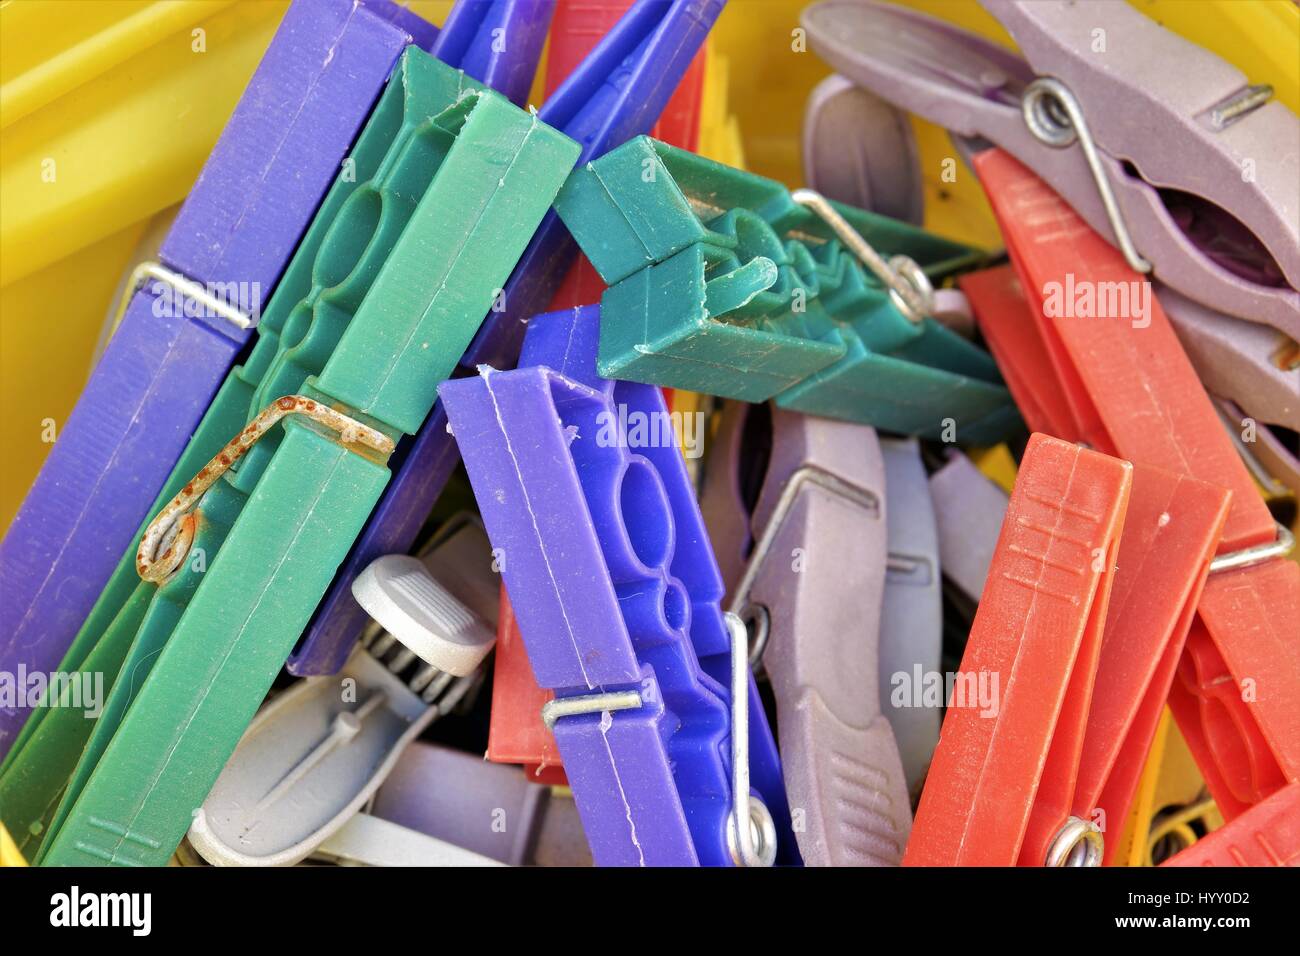 Colorful tweezers to hang clothes to dry Stock Photo